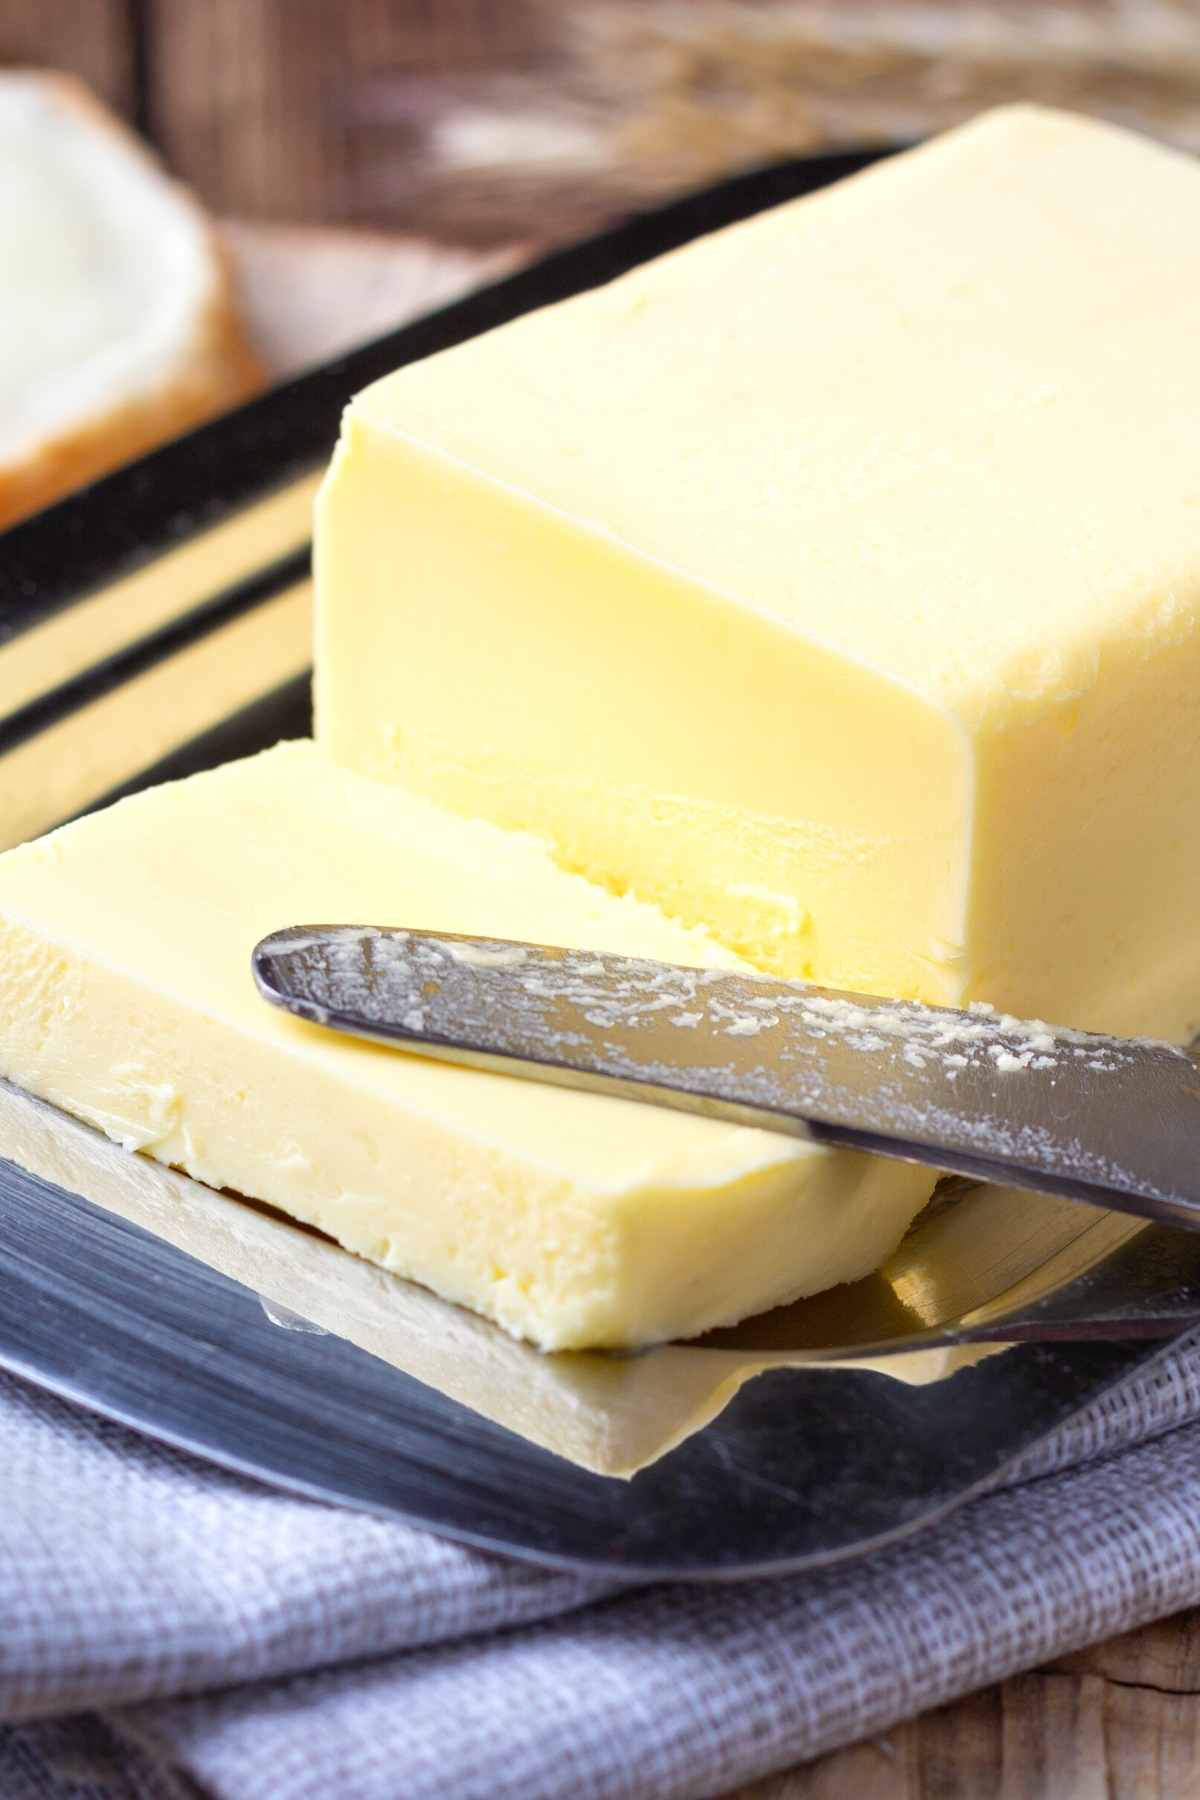 Butter on a plate with a knife and cut slice.